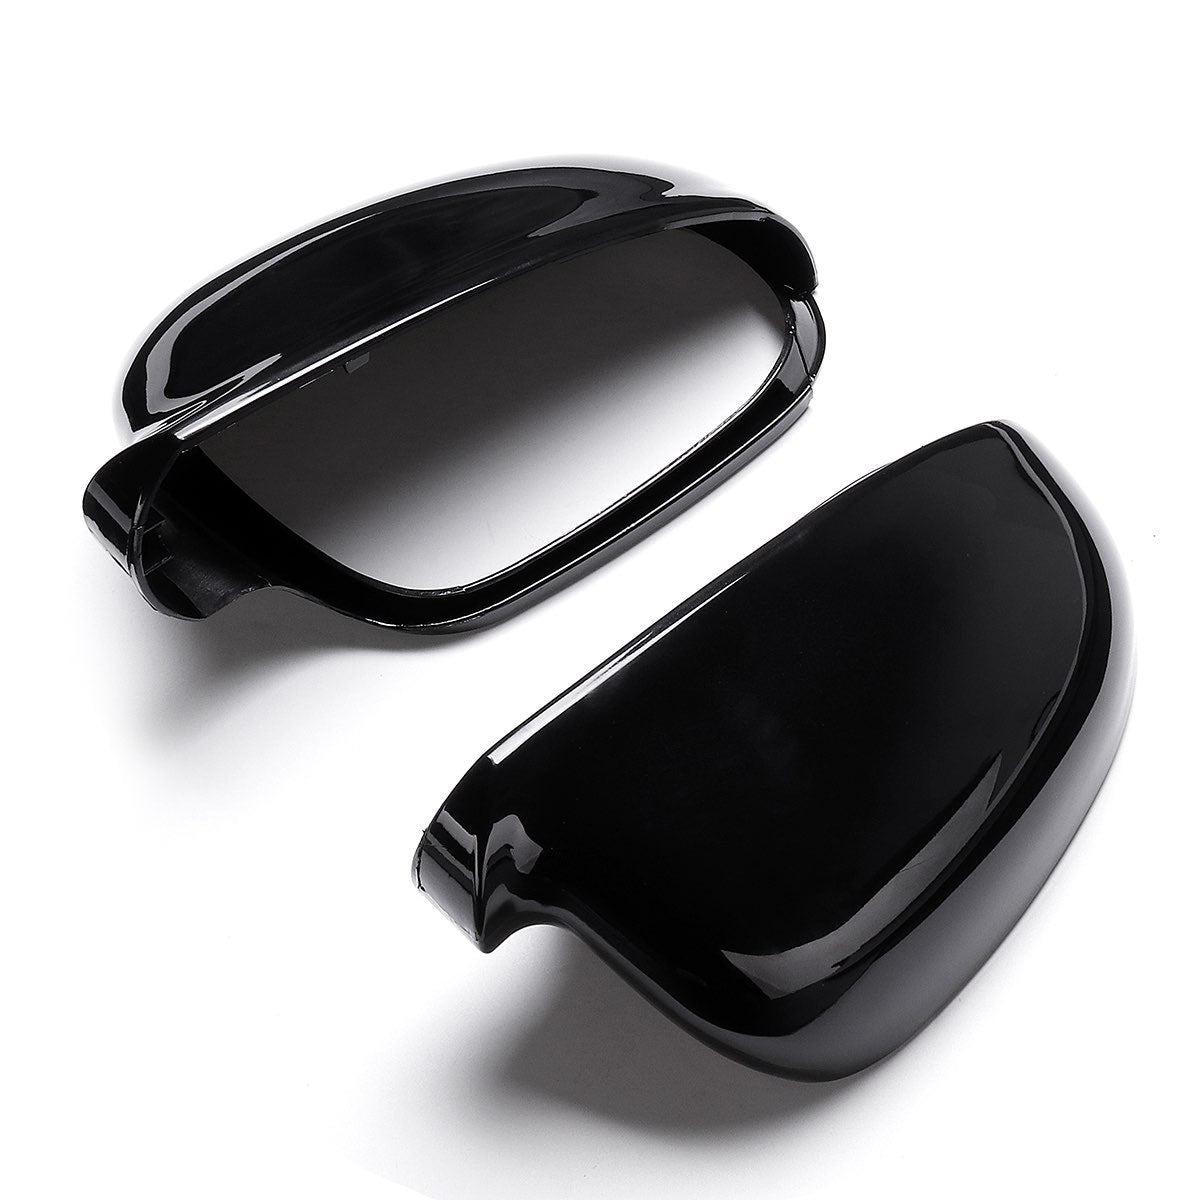 (LEFT) Black Rearview Wing Mirror Cover Casing Suit For Volkswagen Suit For VW Jetta Golf MK5